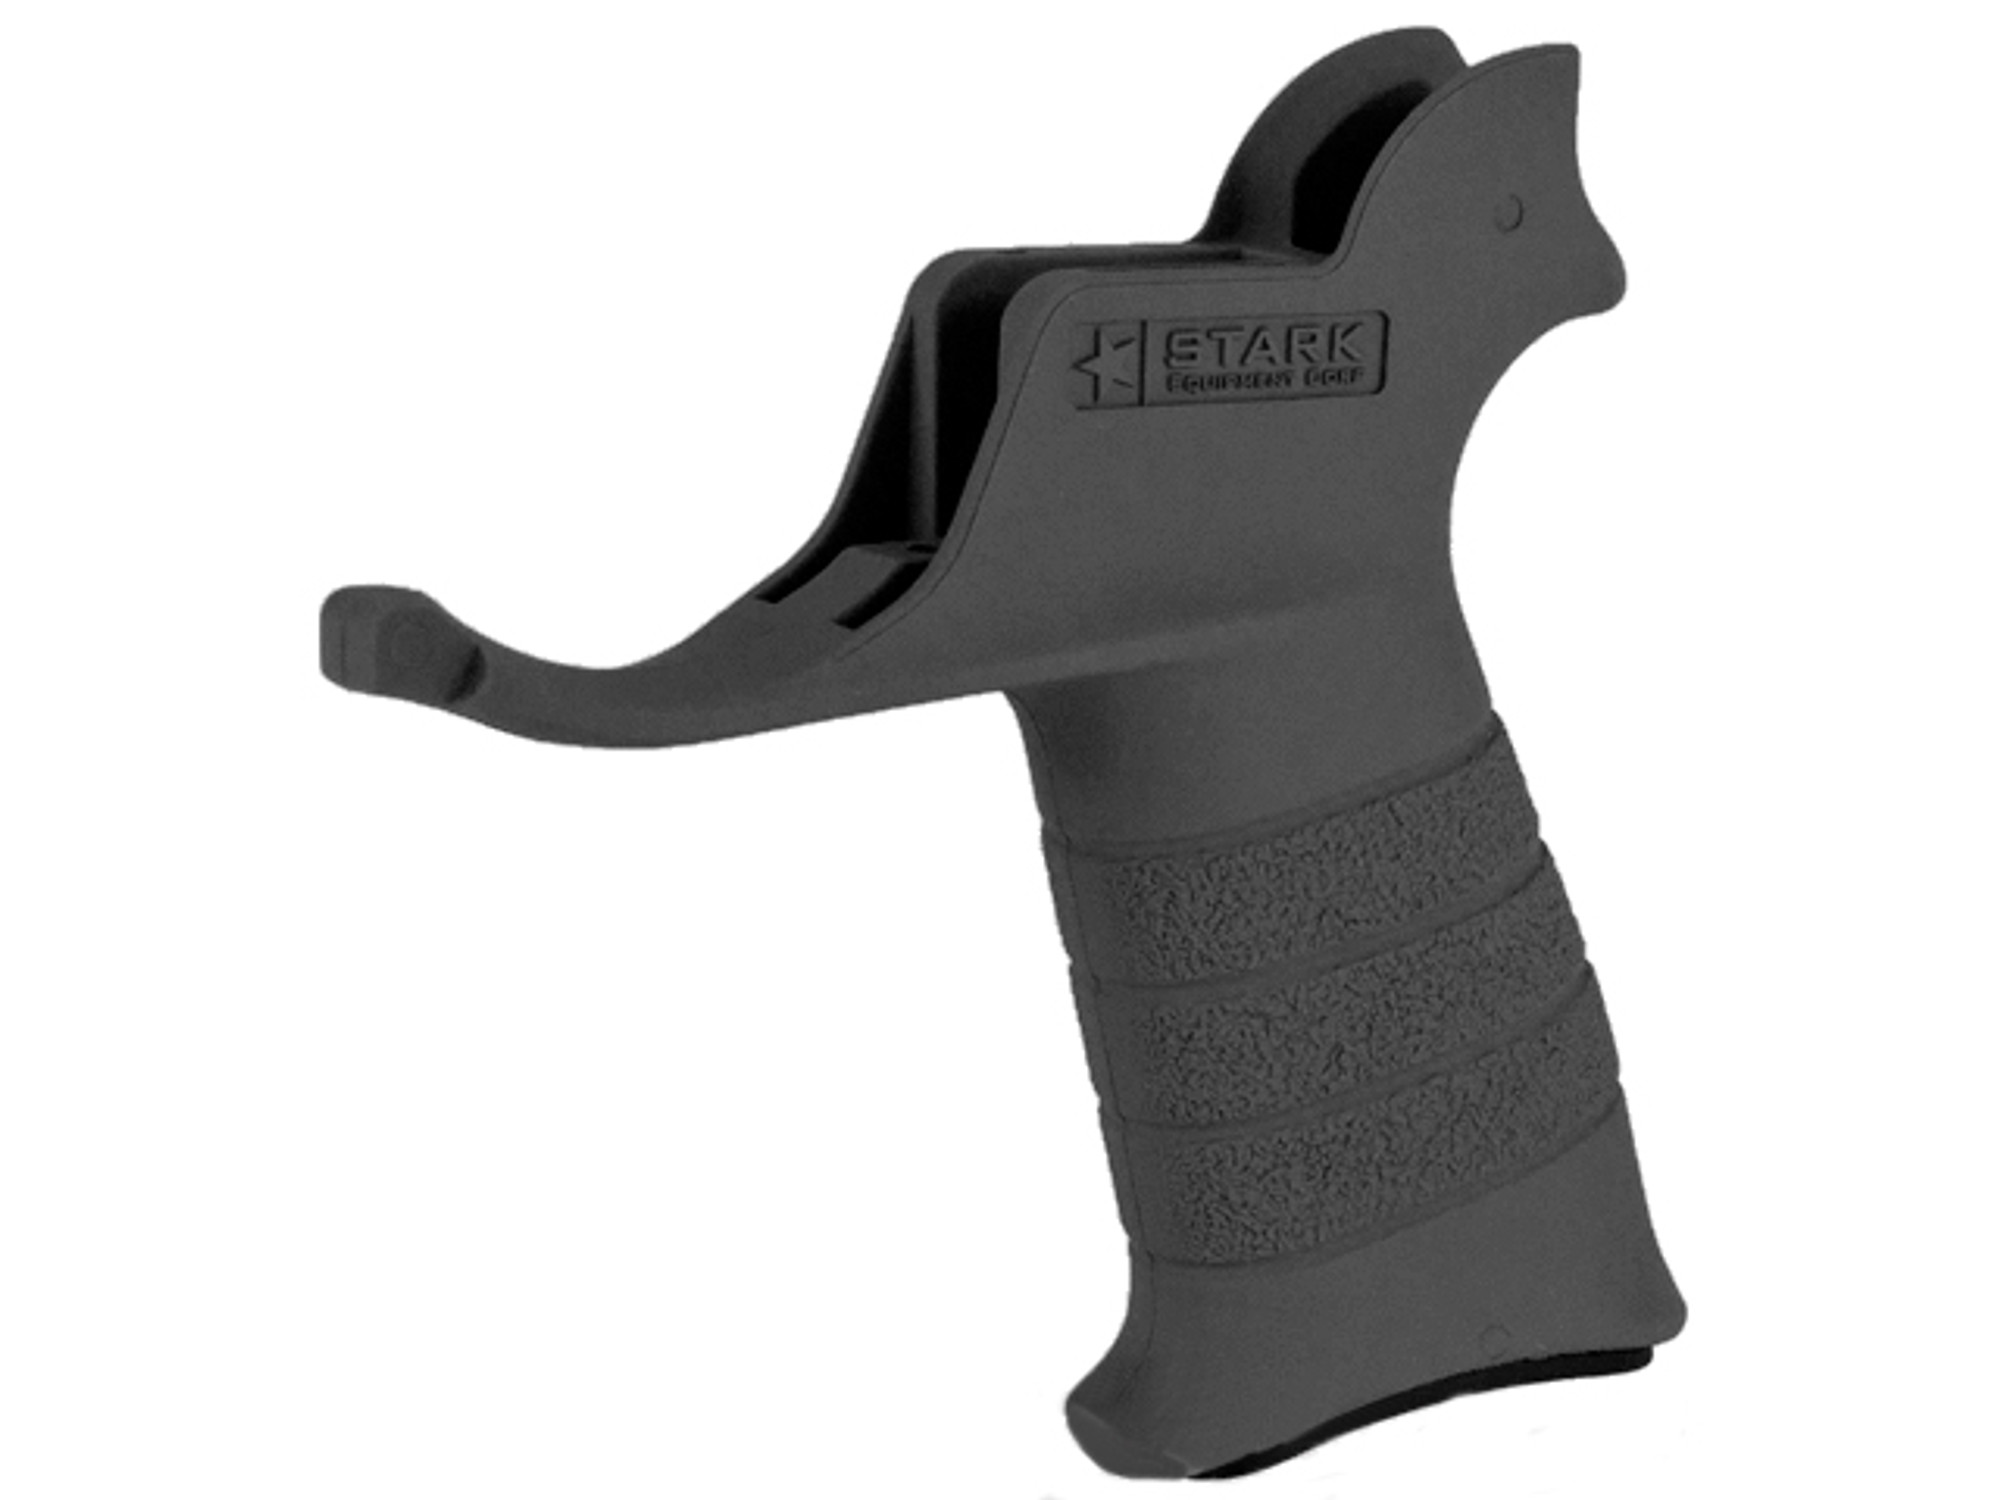 Stark Equipment AR SE1 Grip for M4 / M16 Series Airsoft GBB and Real Steel AR15 Rifles - Black